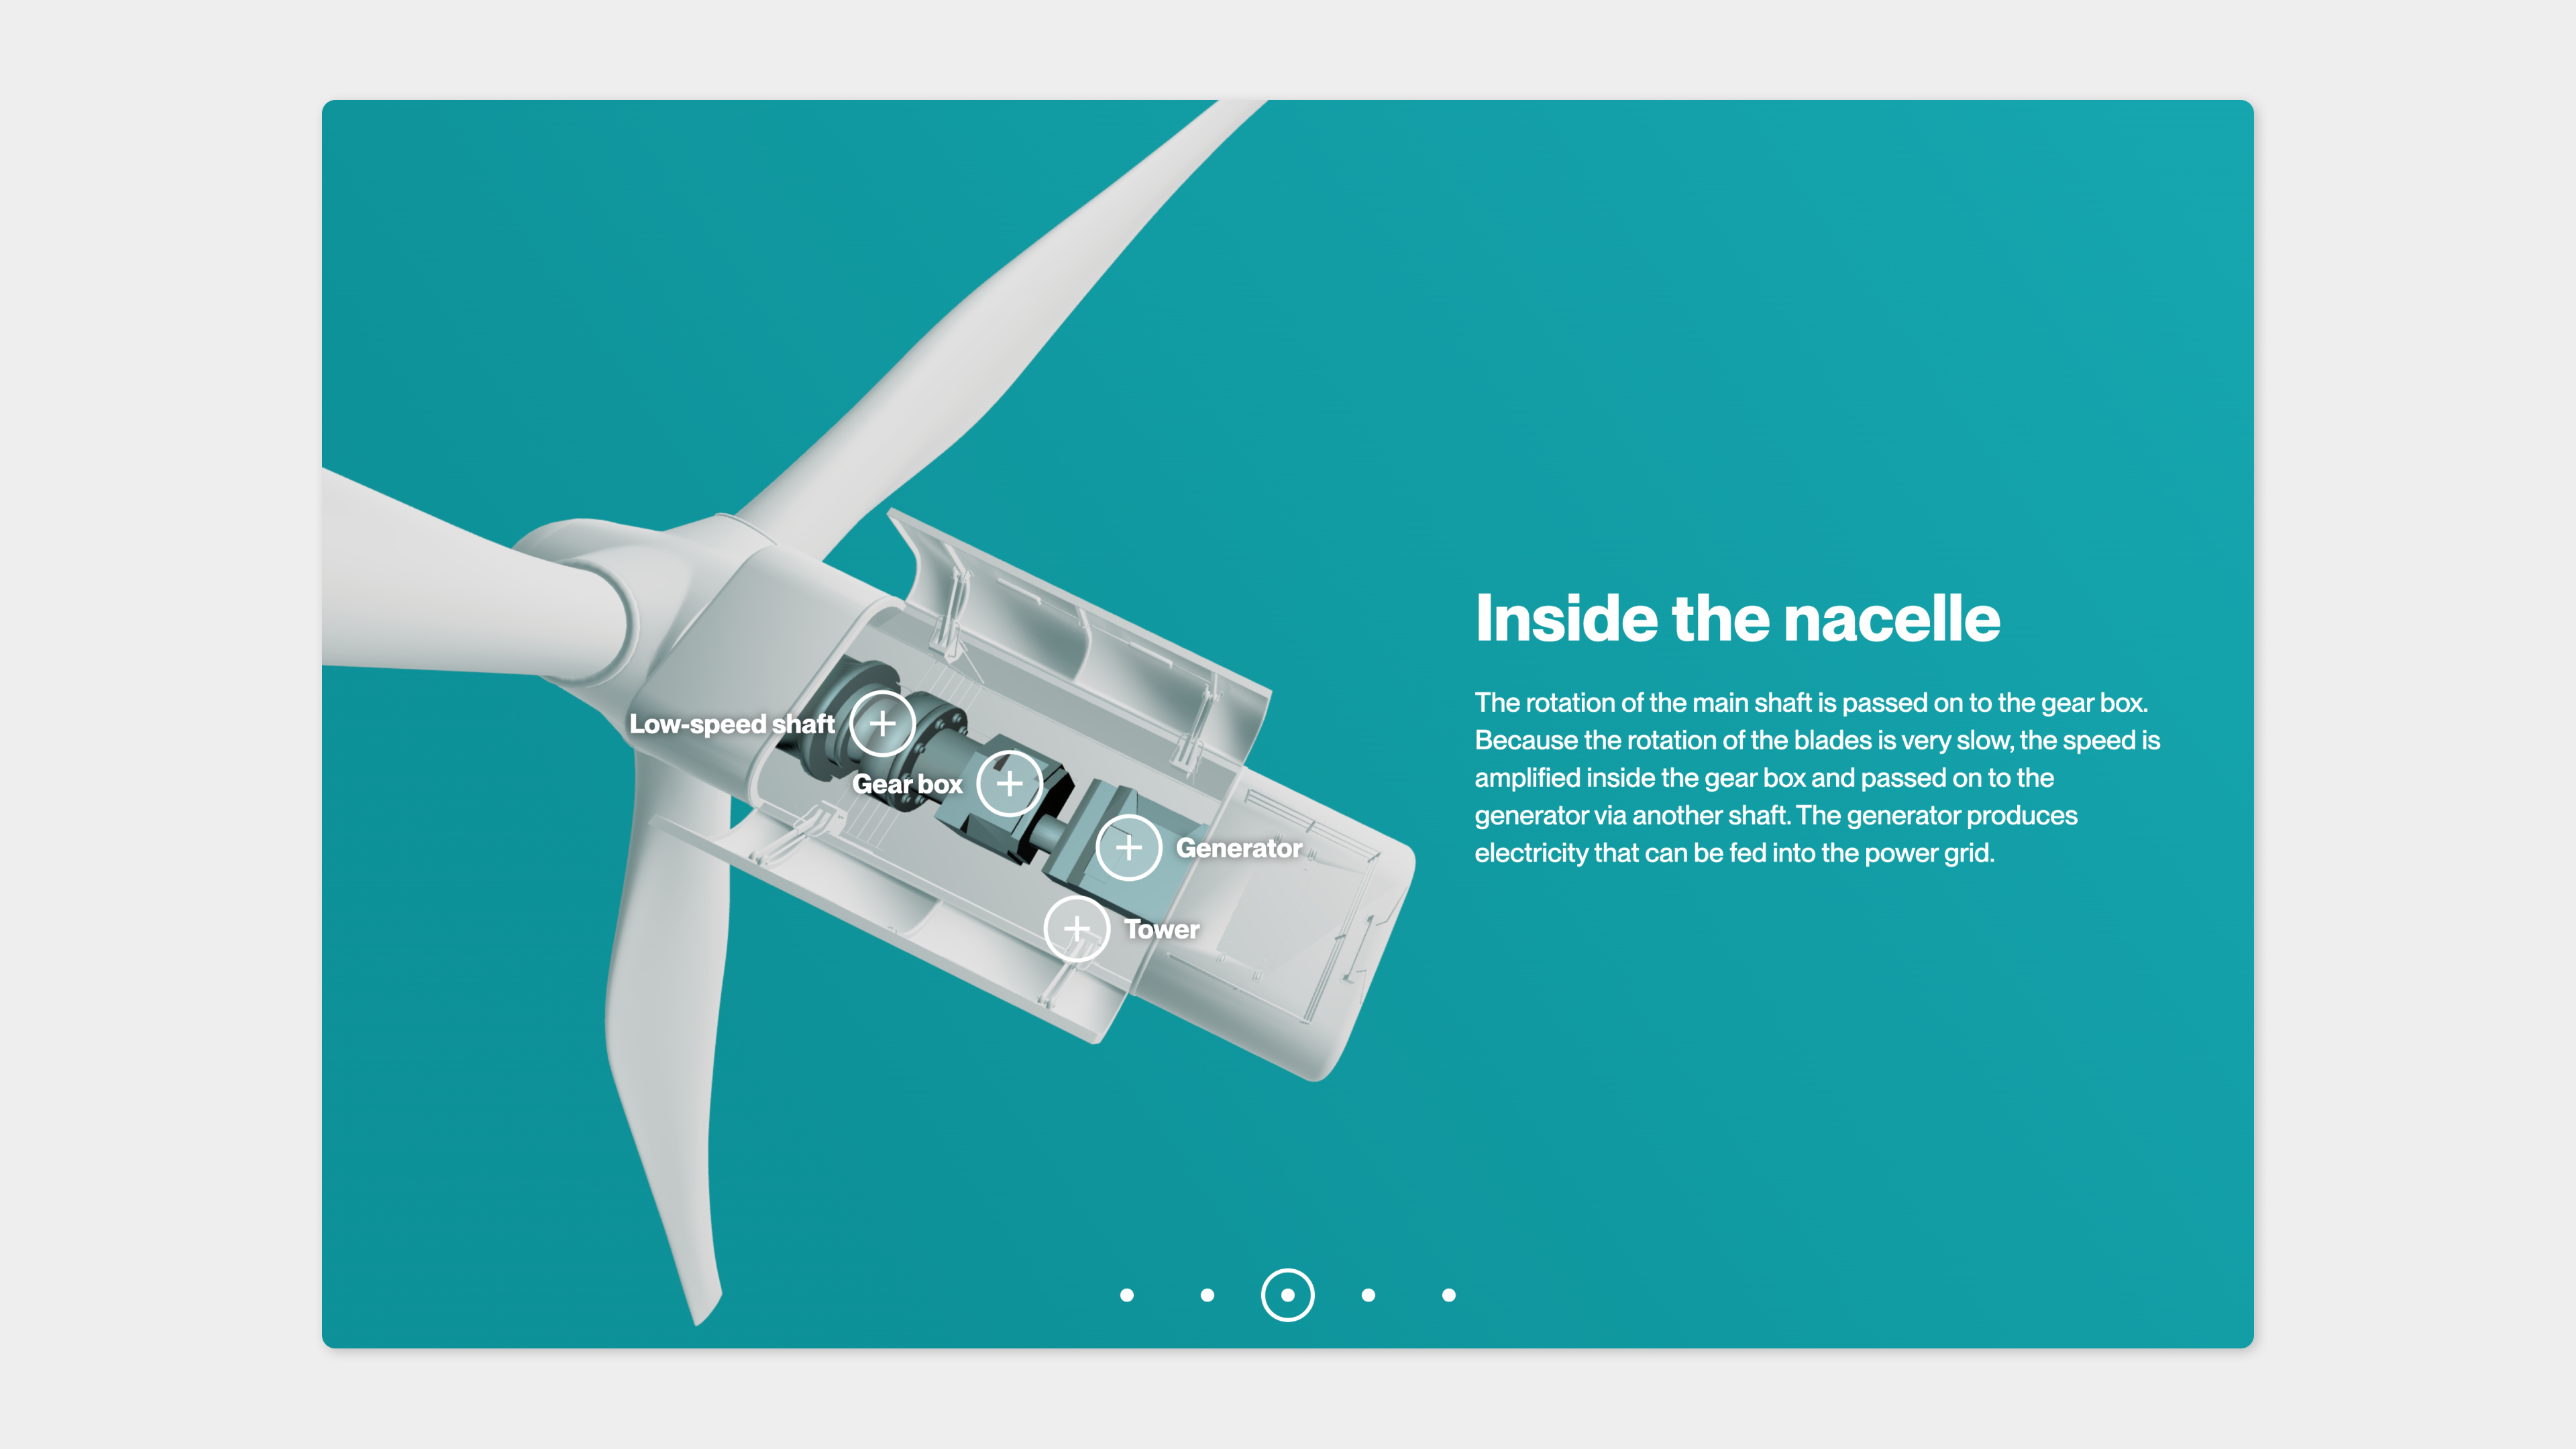 The 3D model of a wind turbine shows its key components and explains how they convert blade rotation into electricity.